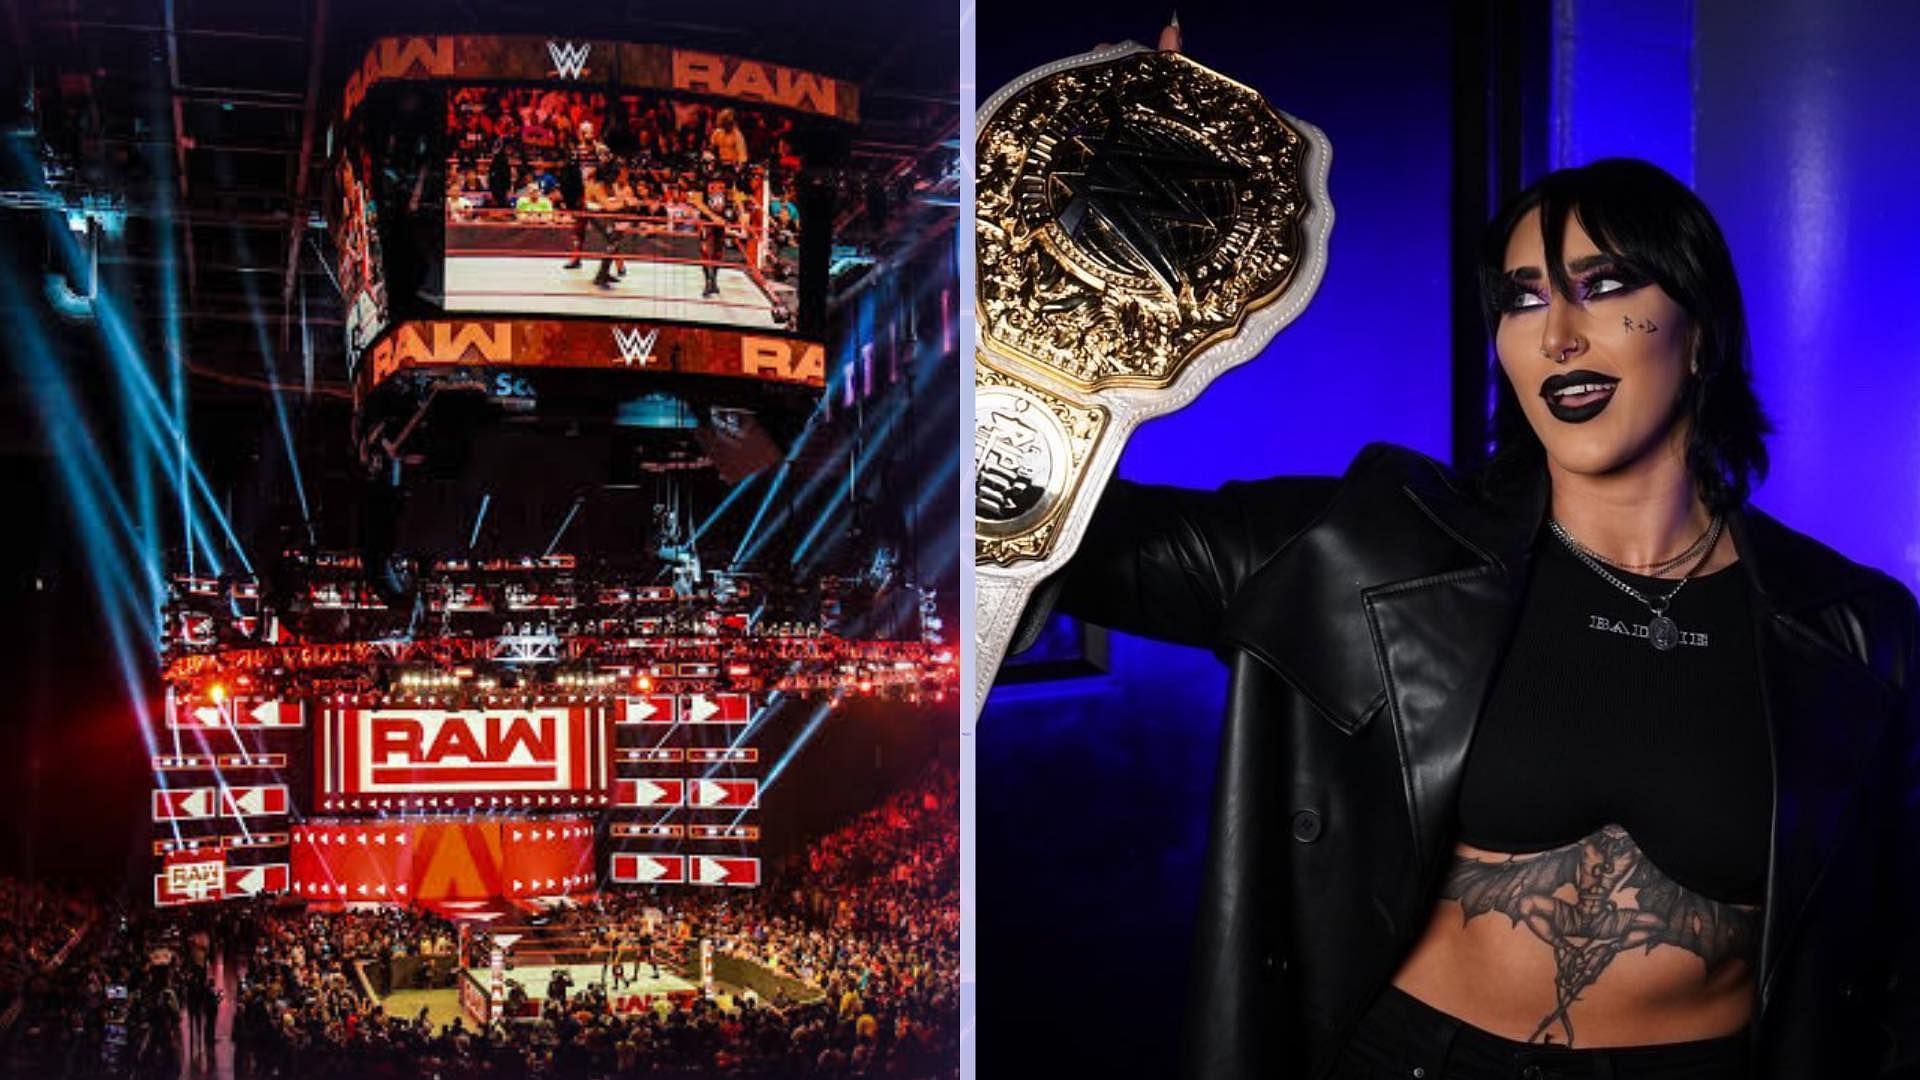 WWE RAW this week was live from the MVP Arena in Albany, New York